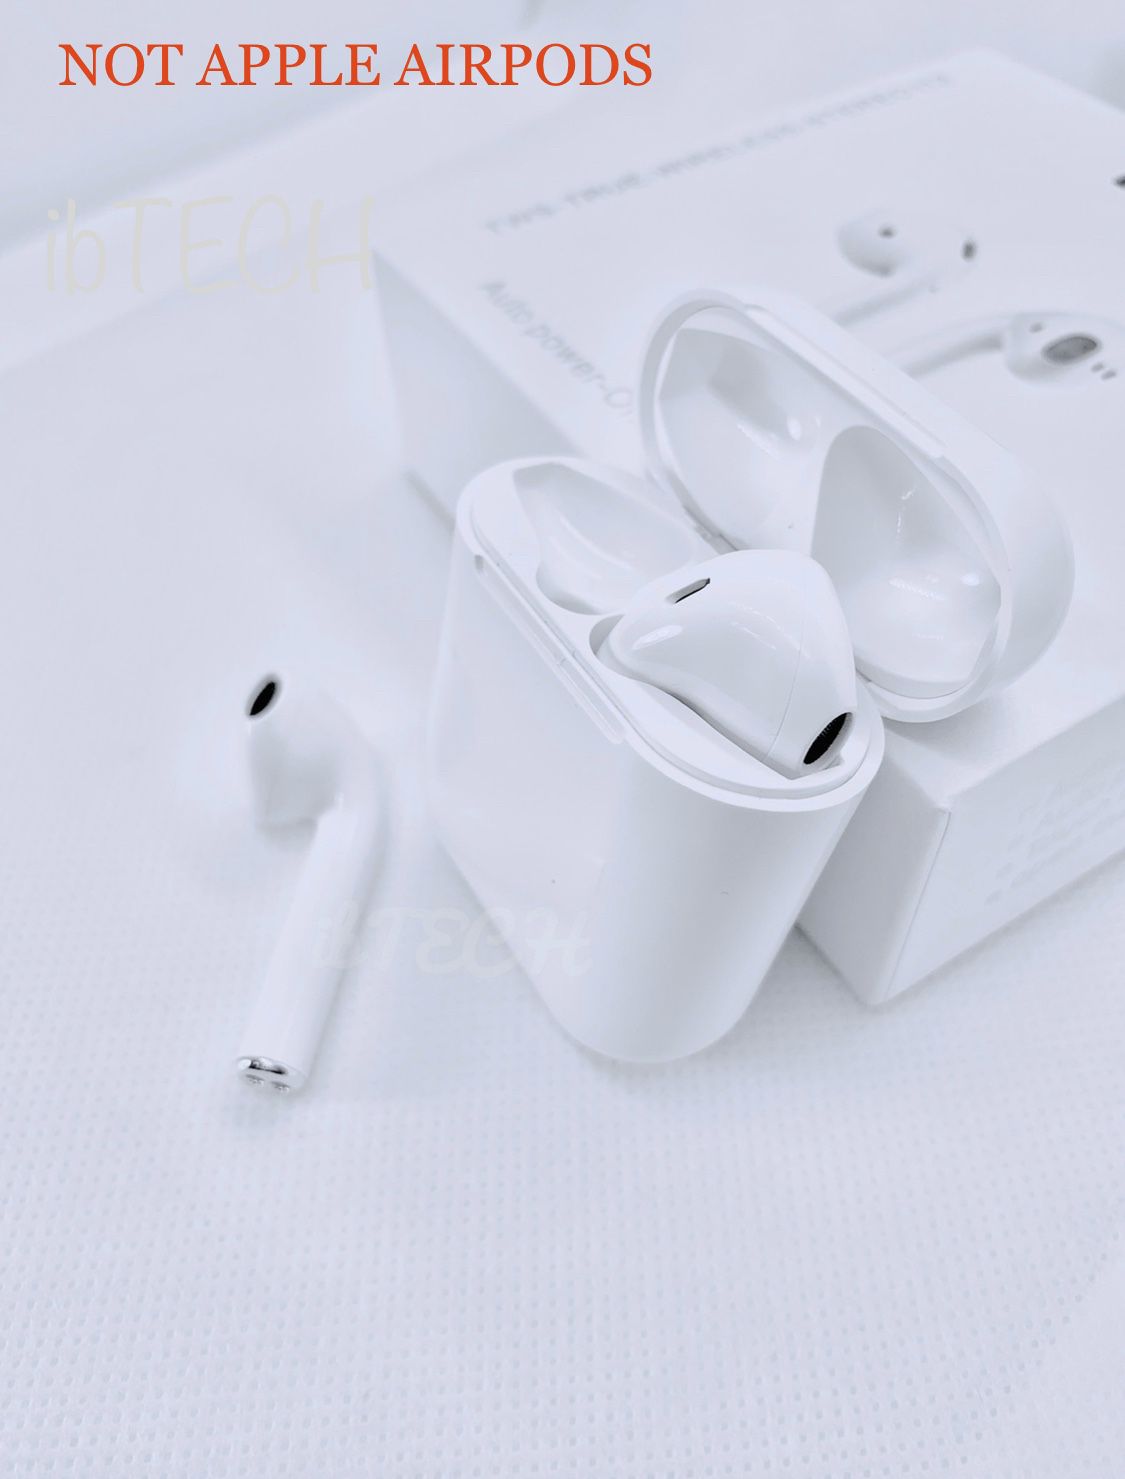 Bluetooth 5.0 Headphones i12 TWS Earbuds for iPhone, Samsung, Android, Airpods and any Wireless Device